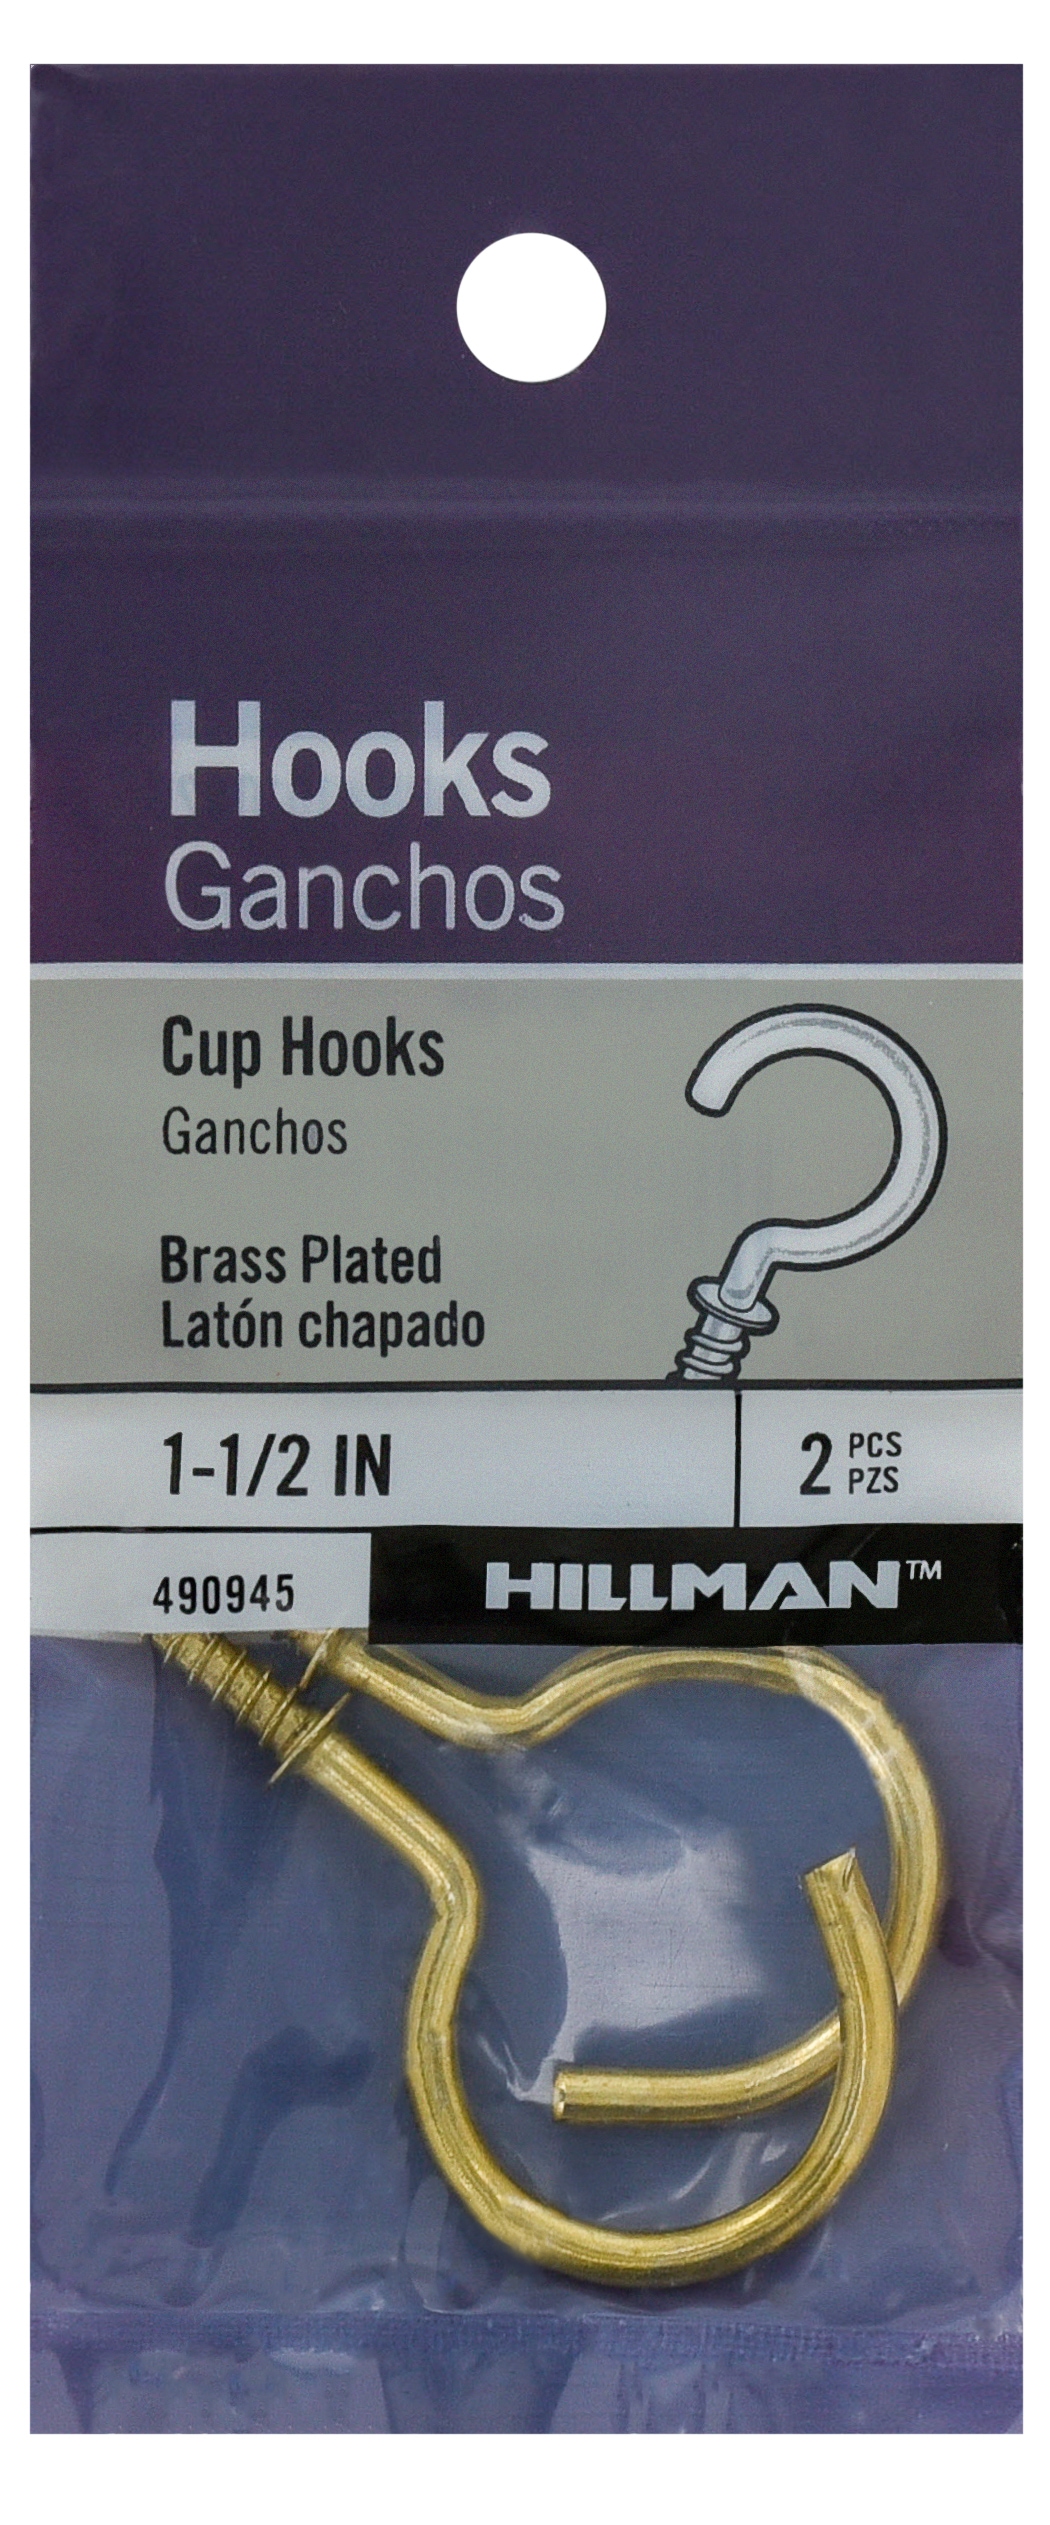 Brass Ceiling Screw Hooks Hanging Cup Hooks 50 Pcs (1 inch)